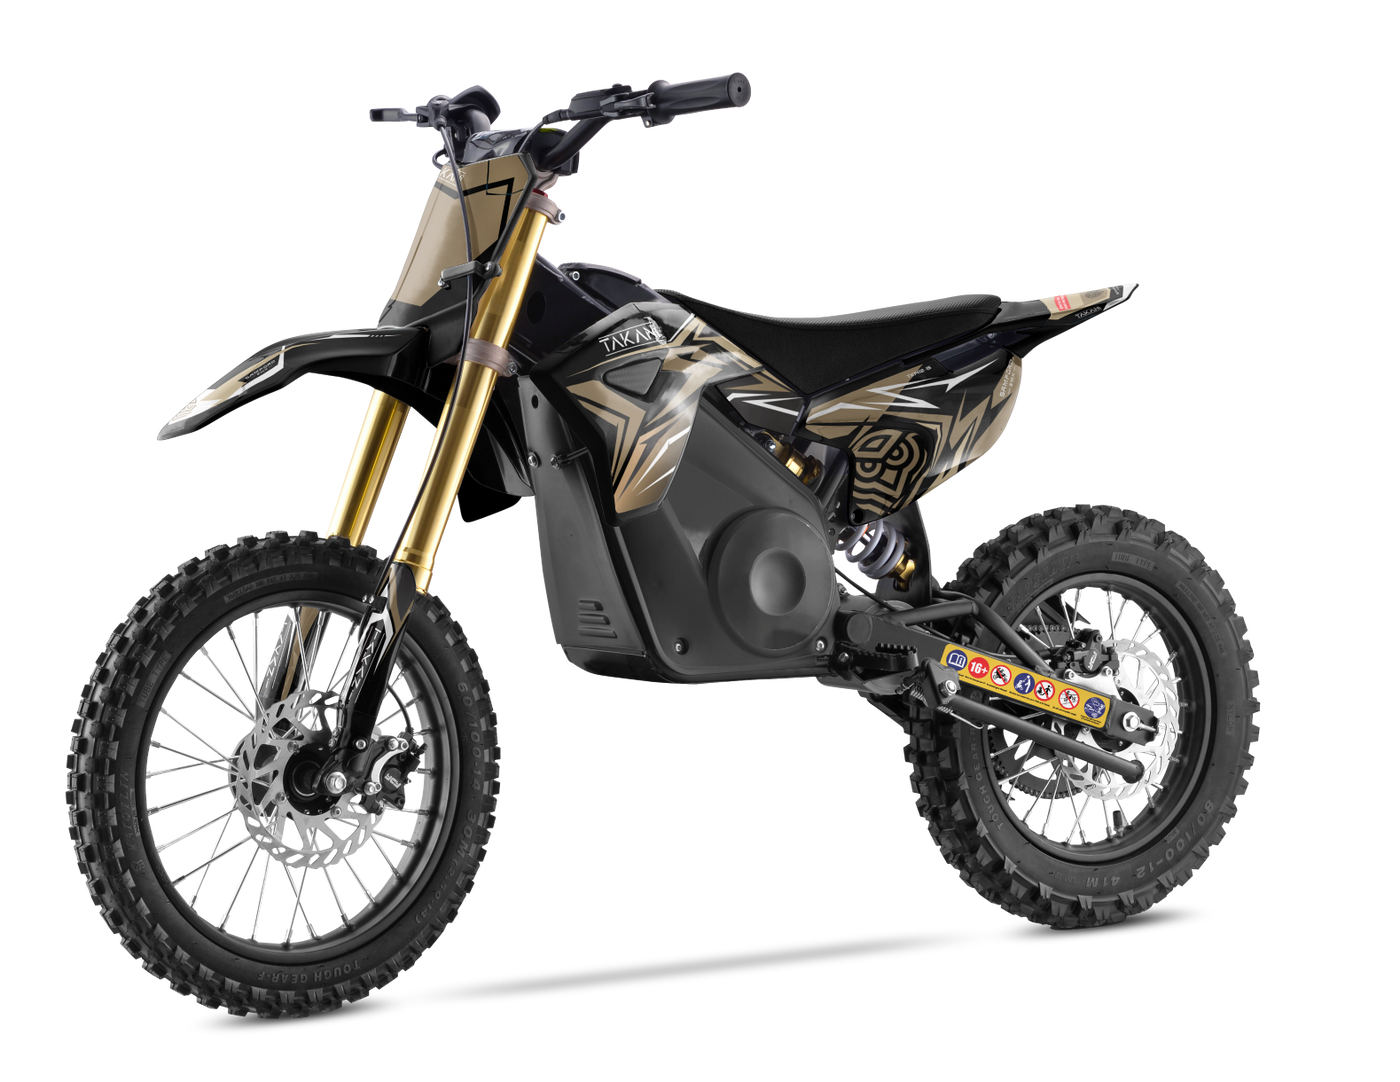 TAKANI 1300W electric pit bike for kids, this MIDI e-powered bike is the perfect beginner bike for those looking to get into motocross and dirt biking.